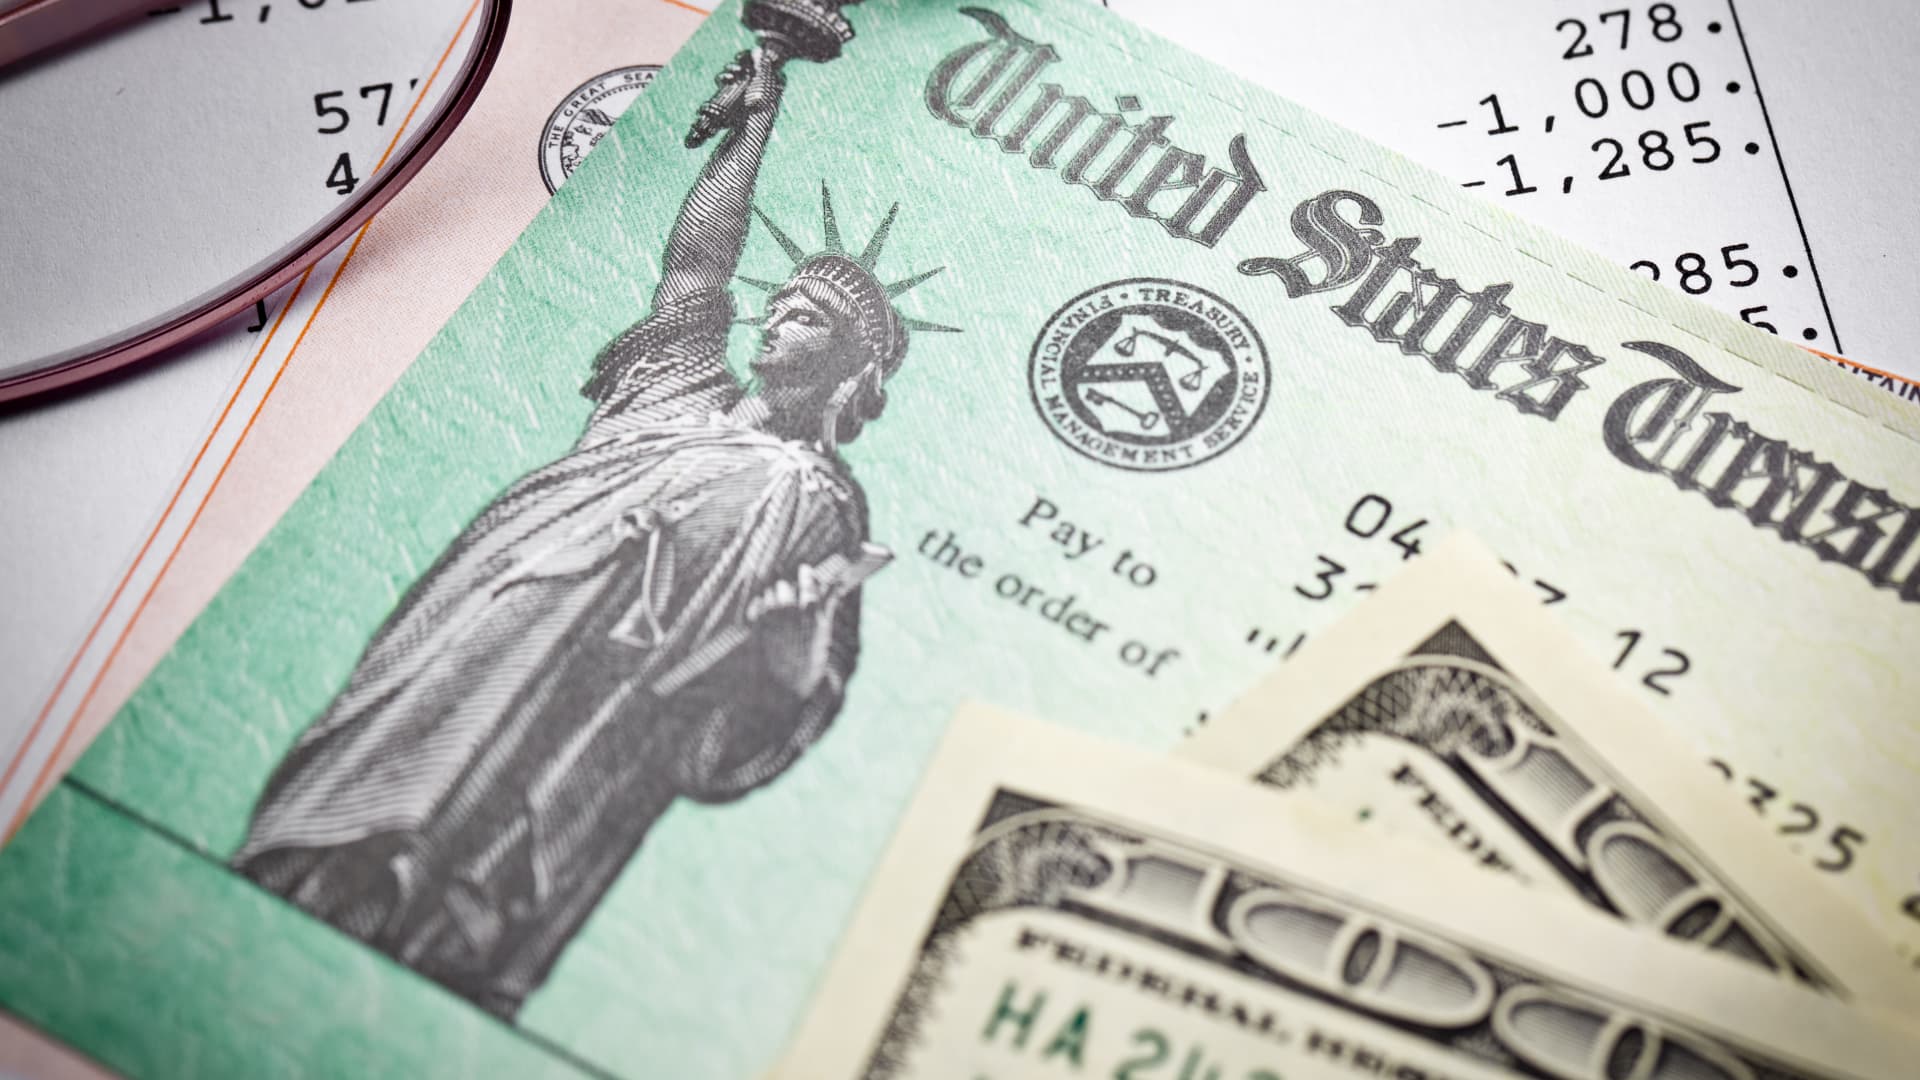 Here's the average tax refund through Feb. 3, according to the IRS